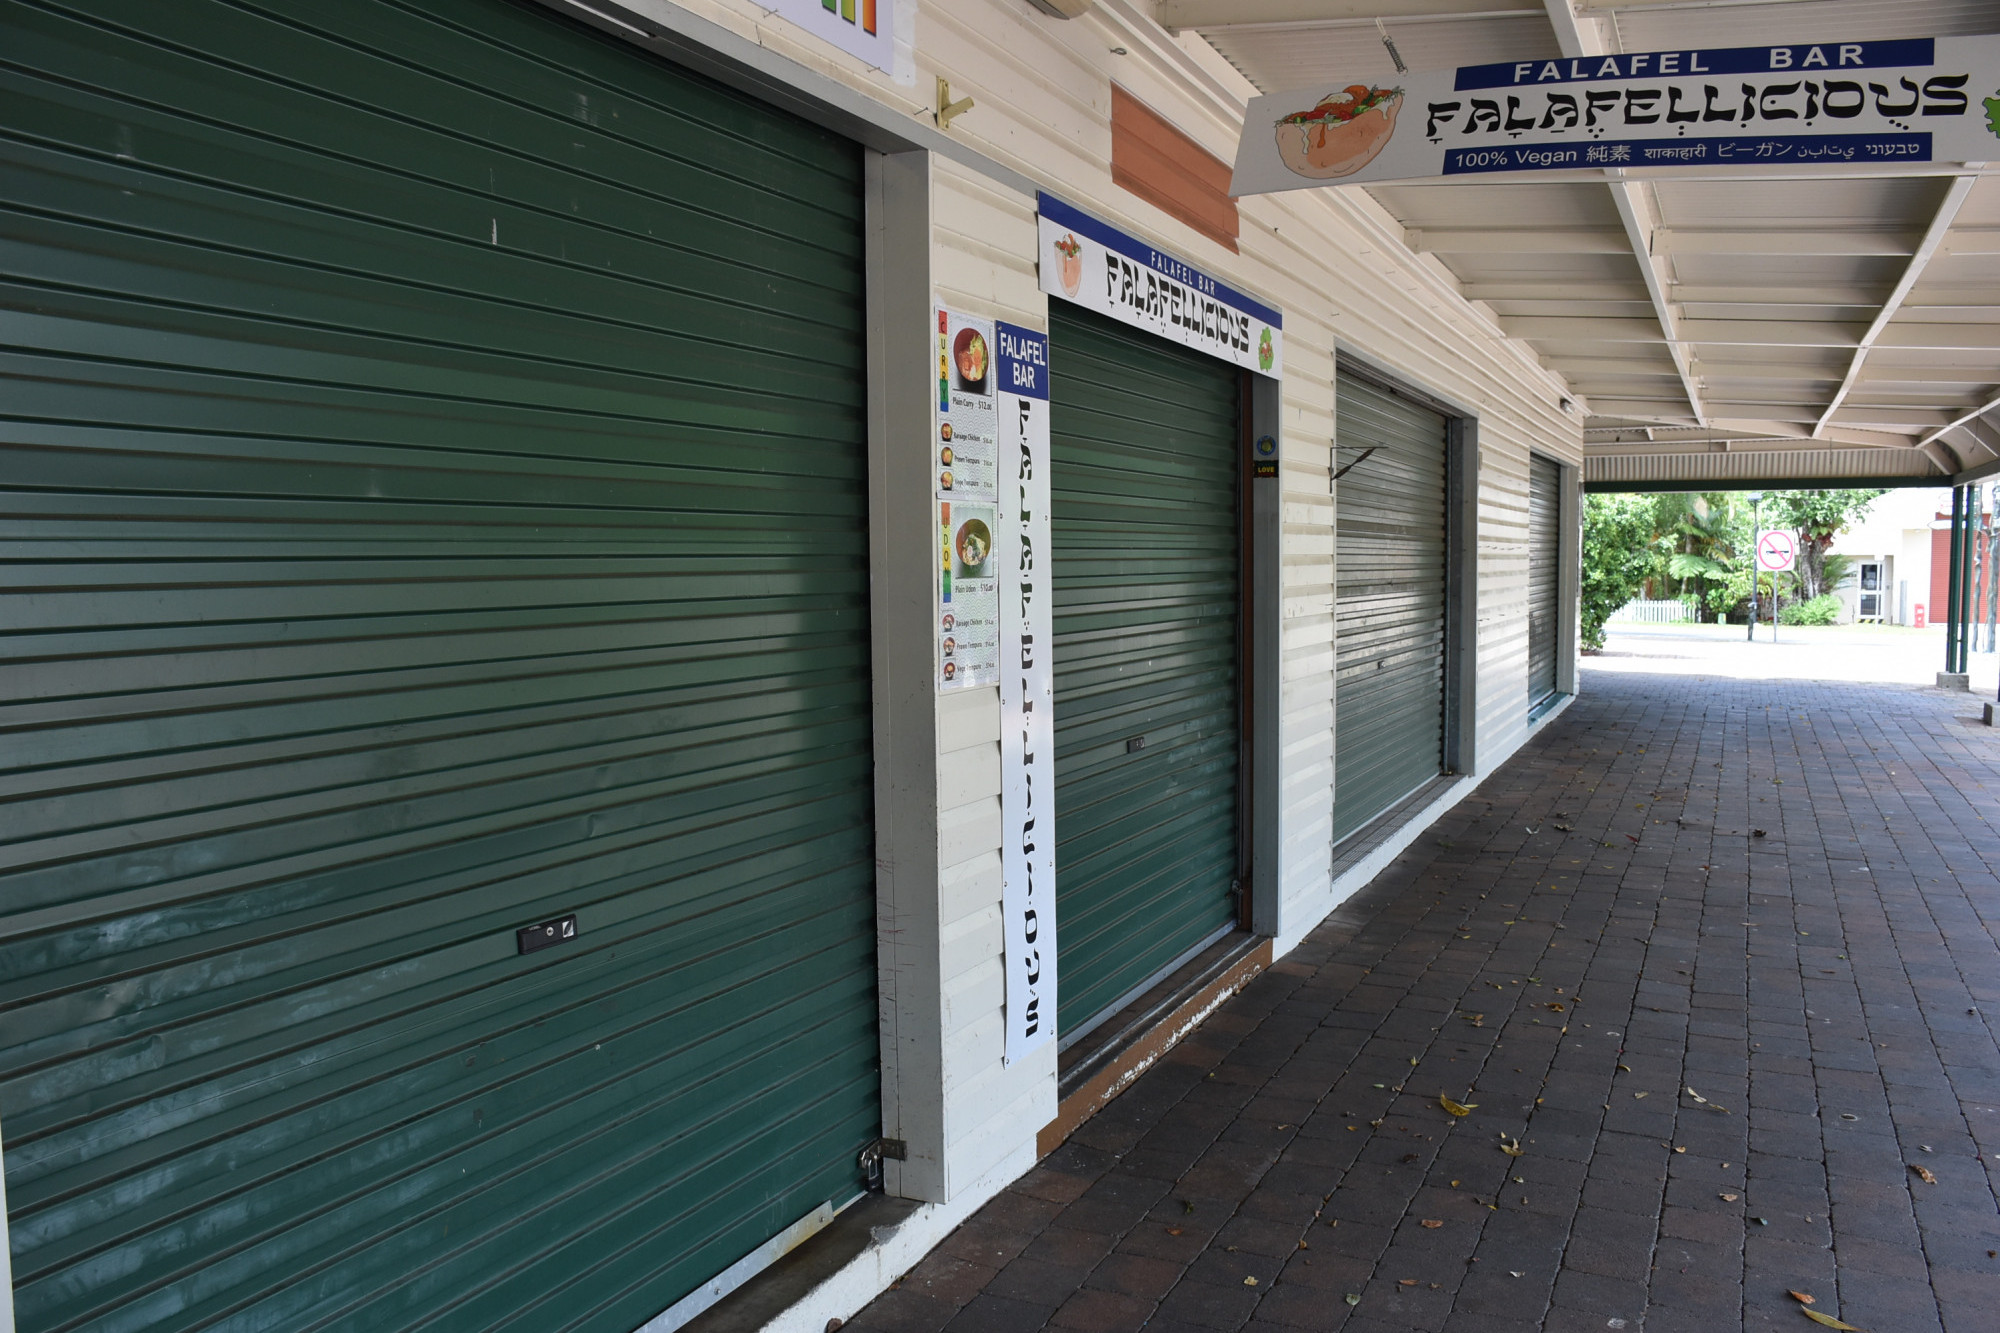 Shop closures have been on the rise in the Kuranda Village.